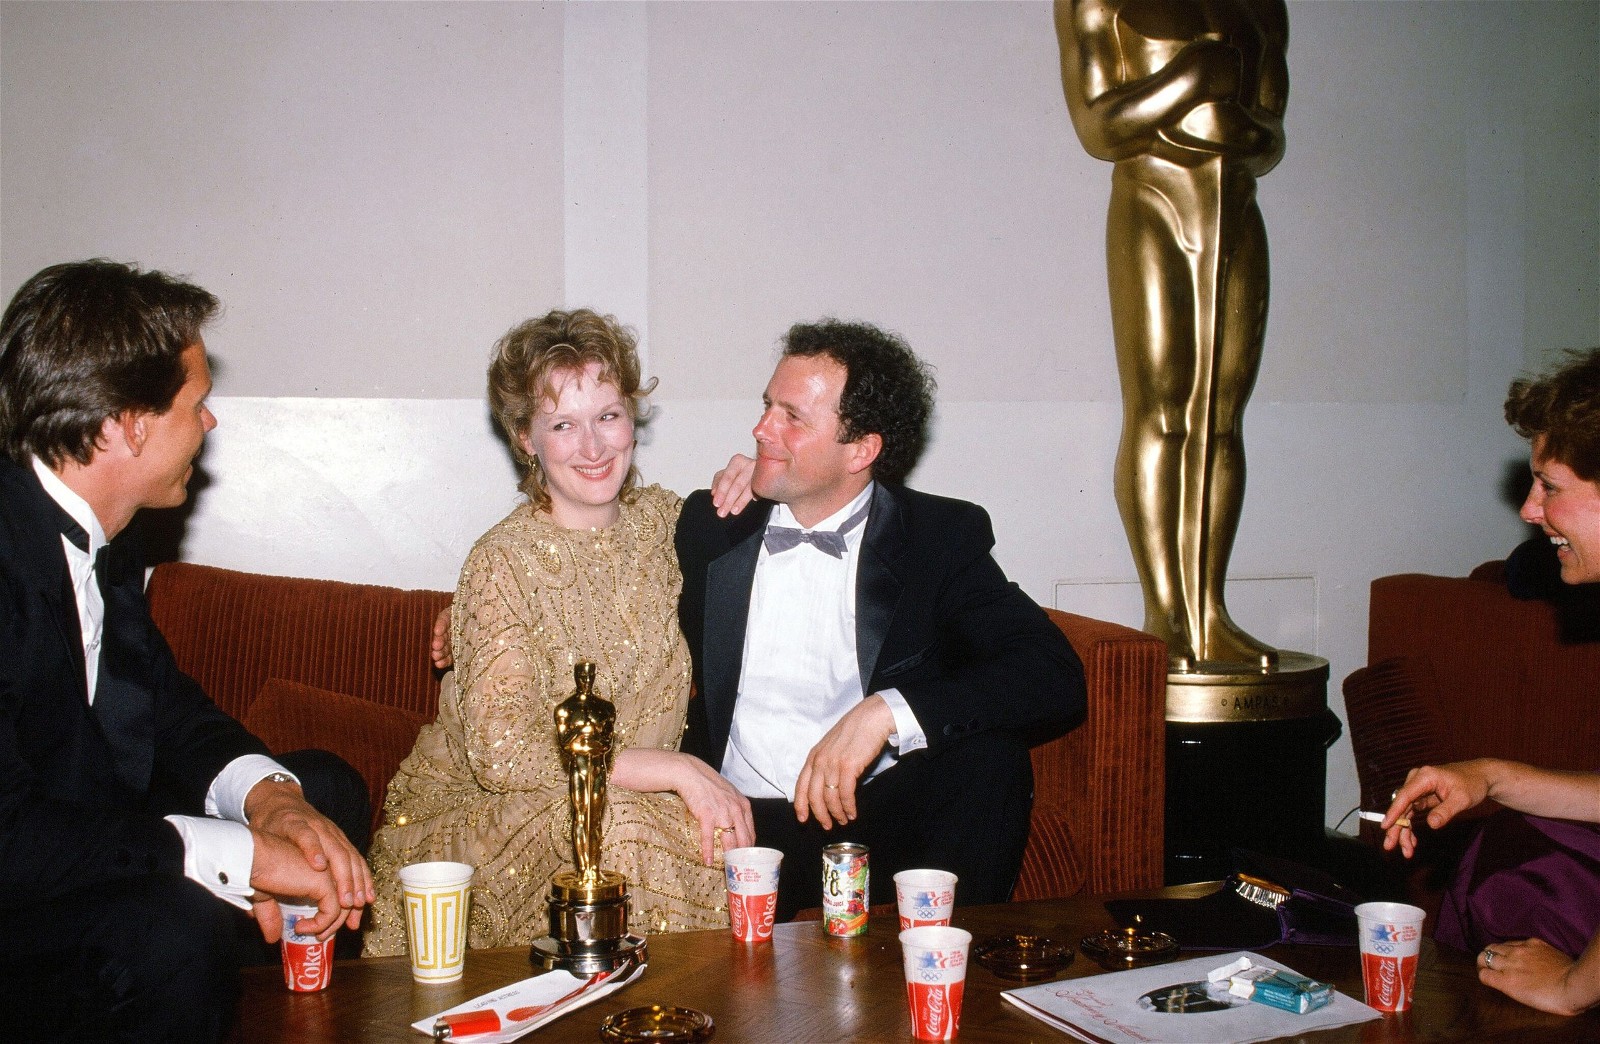 Meryl Streep and her husband Don Gummer backstage during the 55th Academy Awards